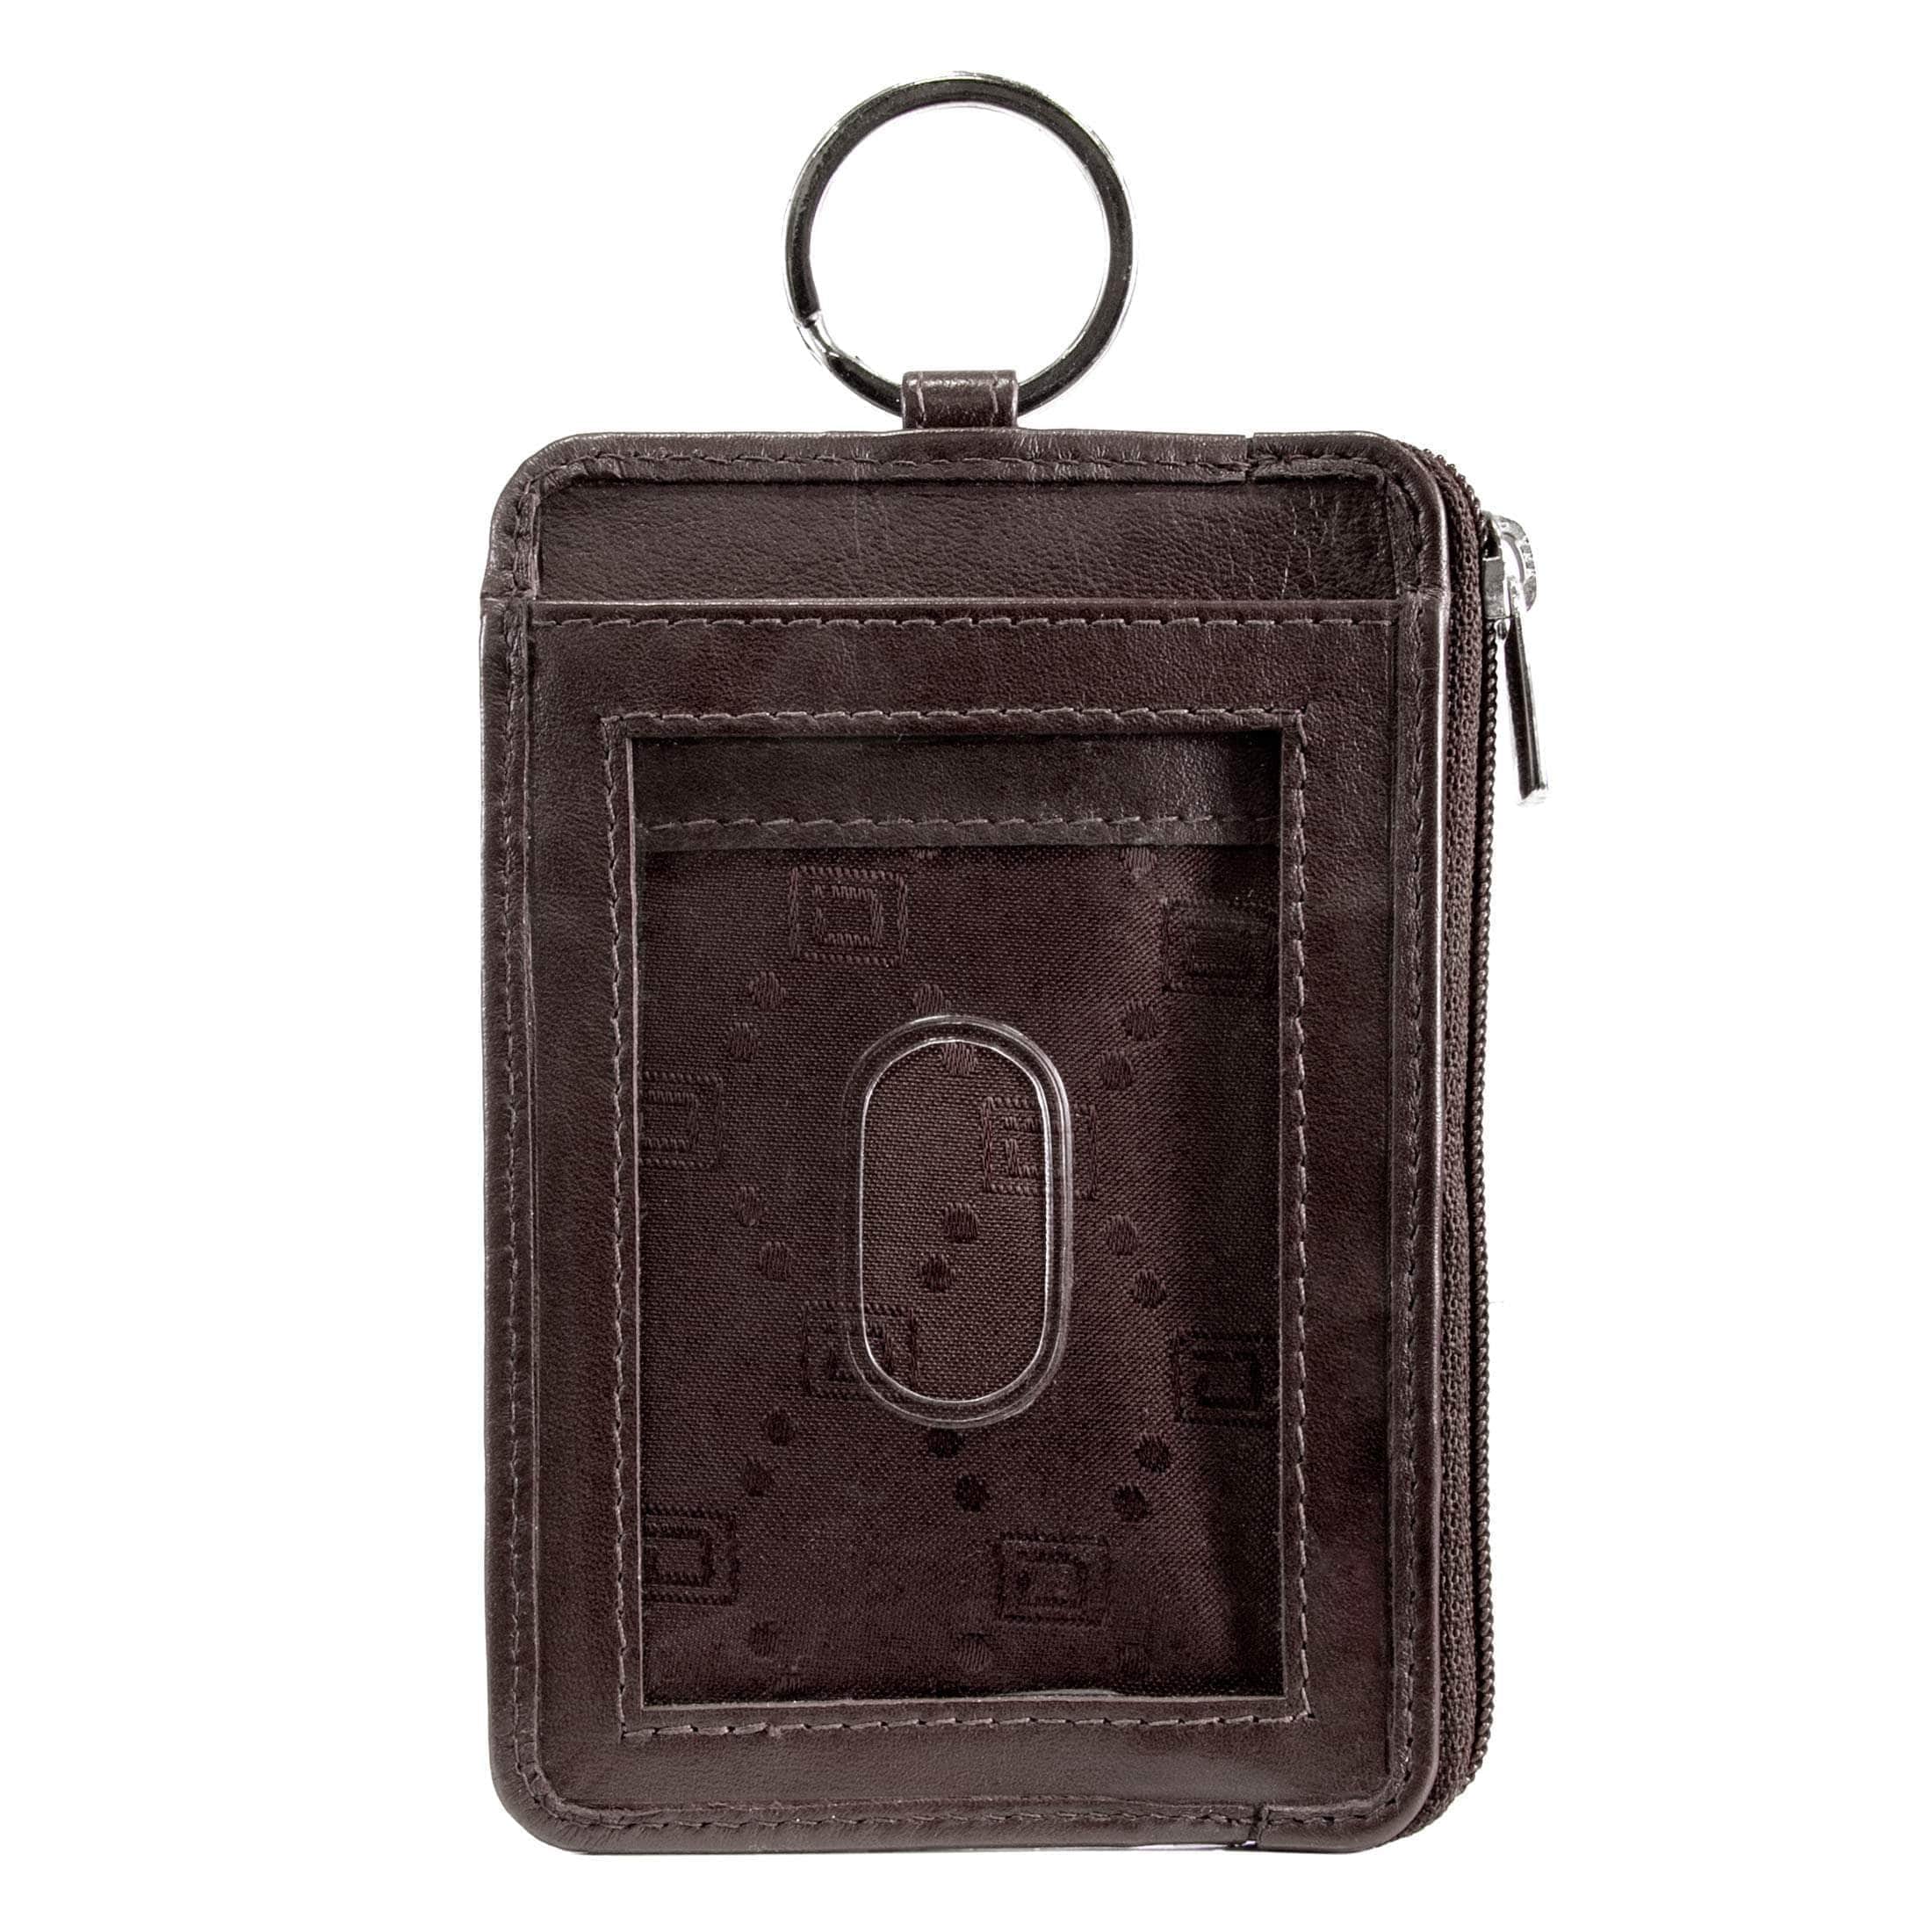 ID Stronghold Badgeholder Leather Mini Brown RFID Wallet Dual Portrait ID Leather Badge Holder